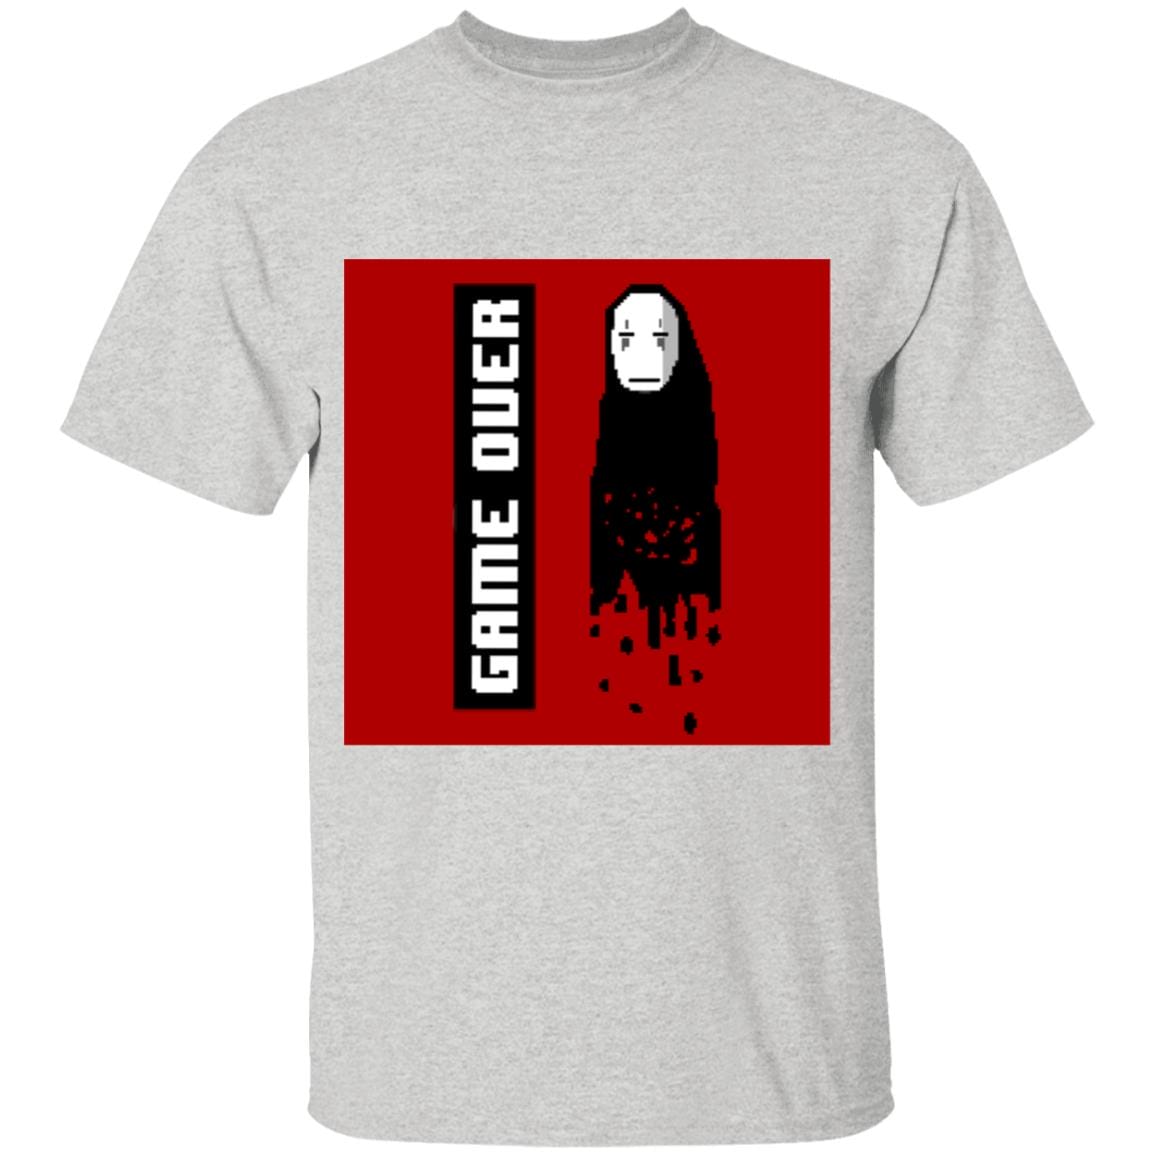 Spirited Away No Face 8 BIT Game Over T Shirt for Kid Ghibli Store ghibli.store